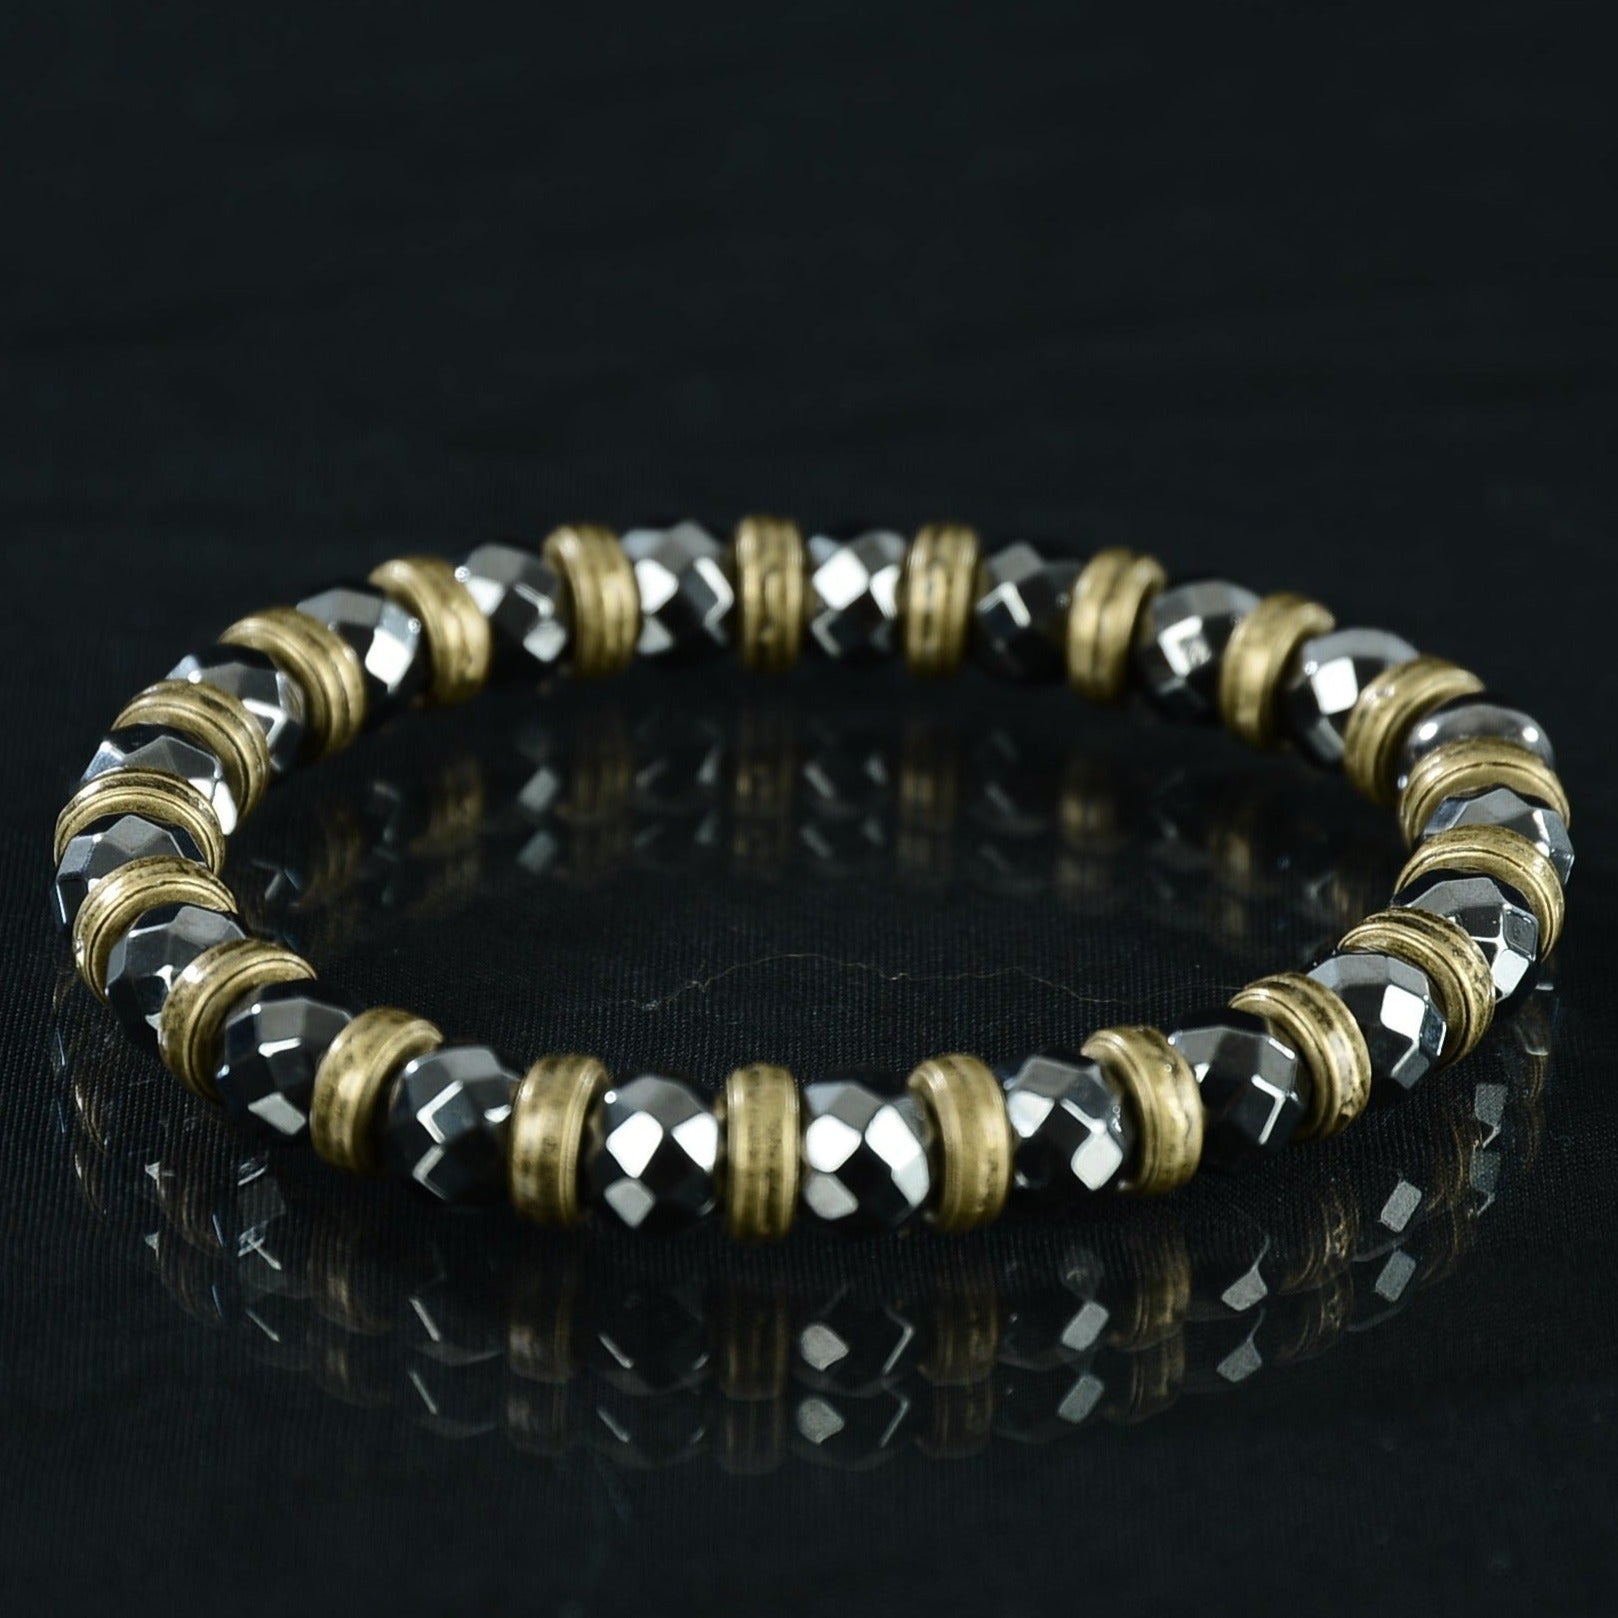 Bead bracelet made of hematite with gold spacers. Made to order. 